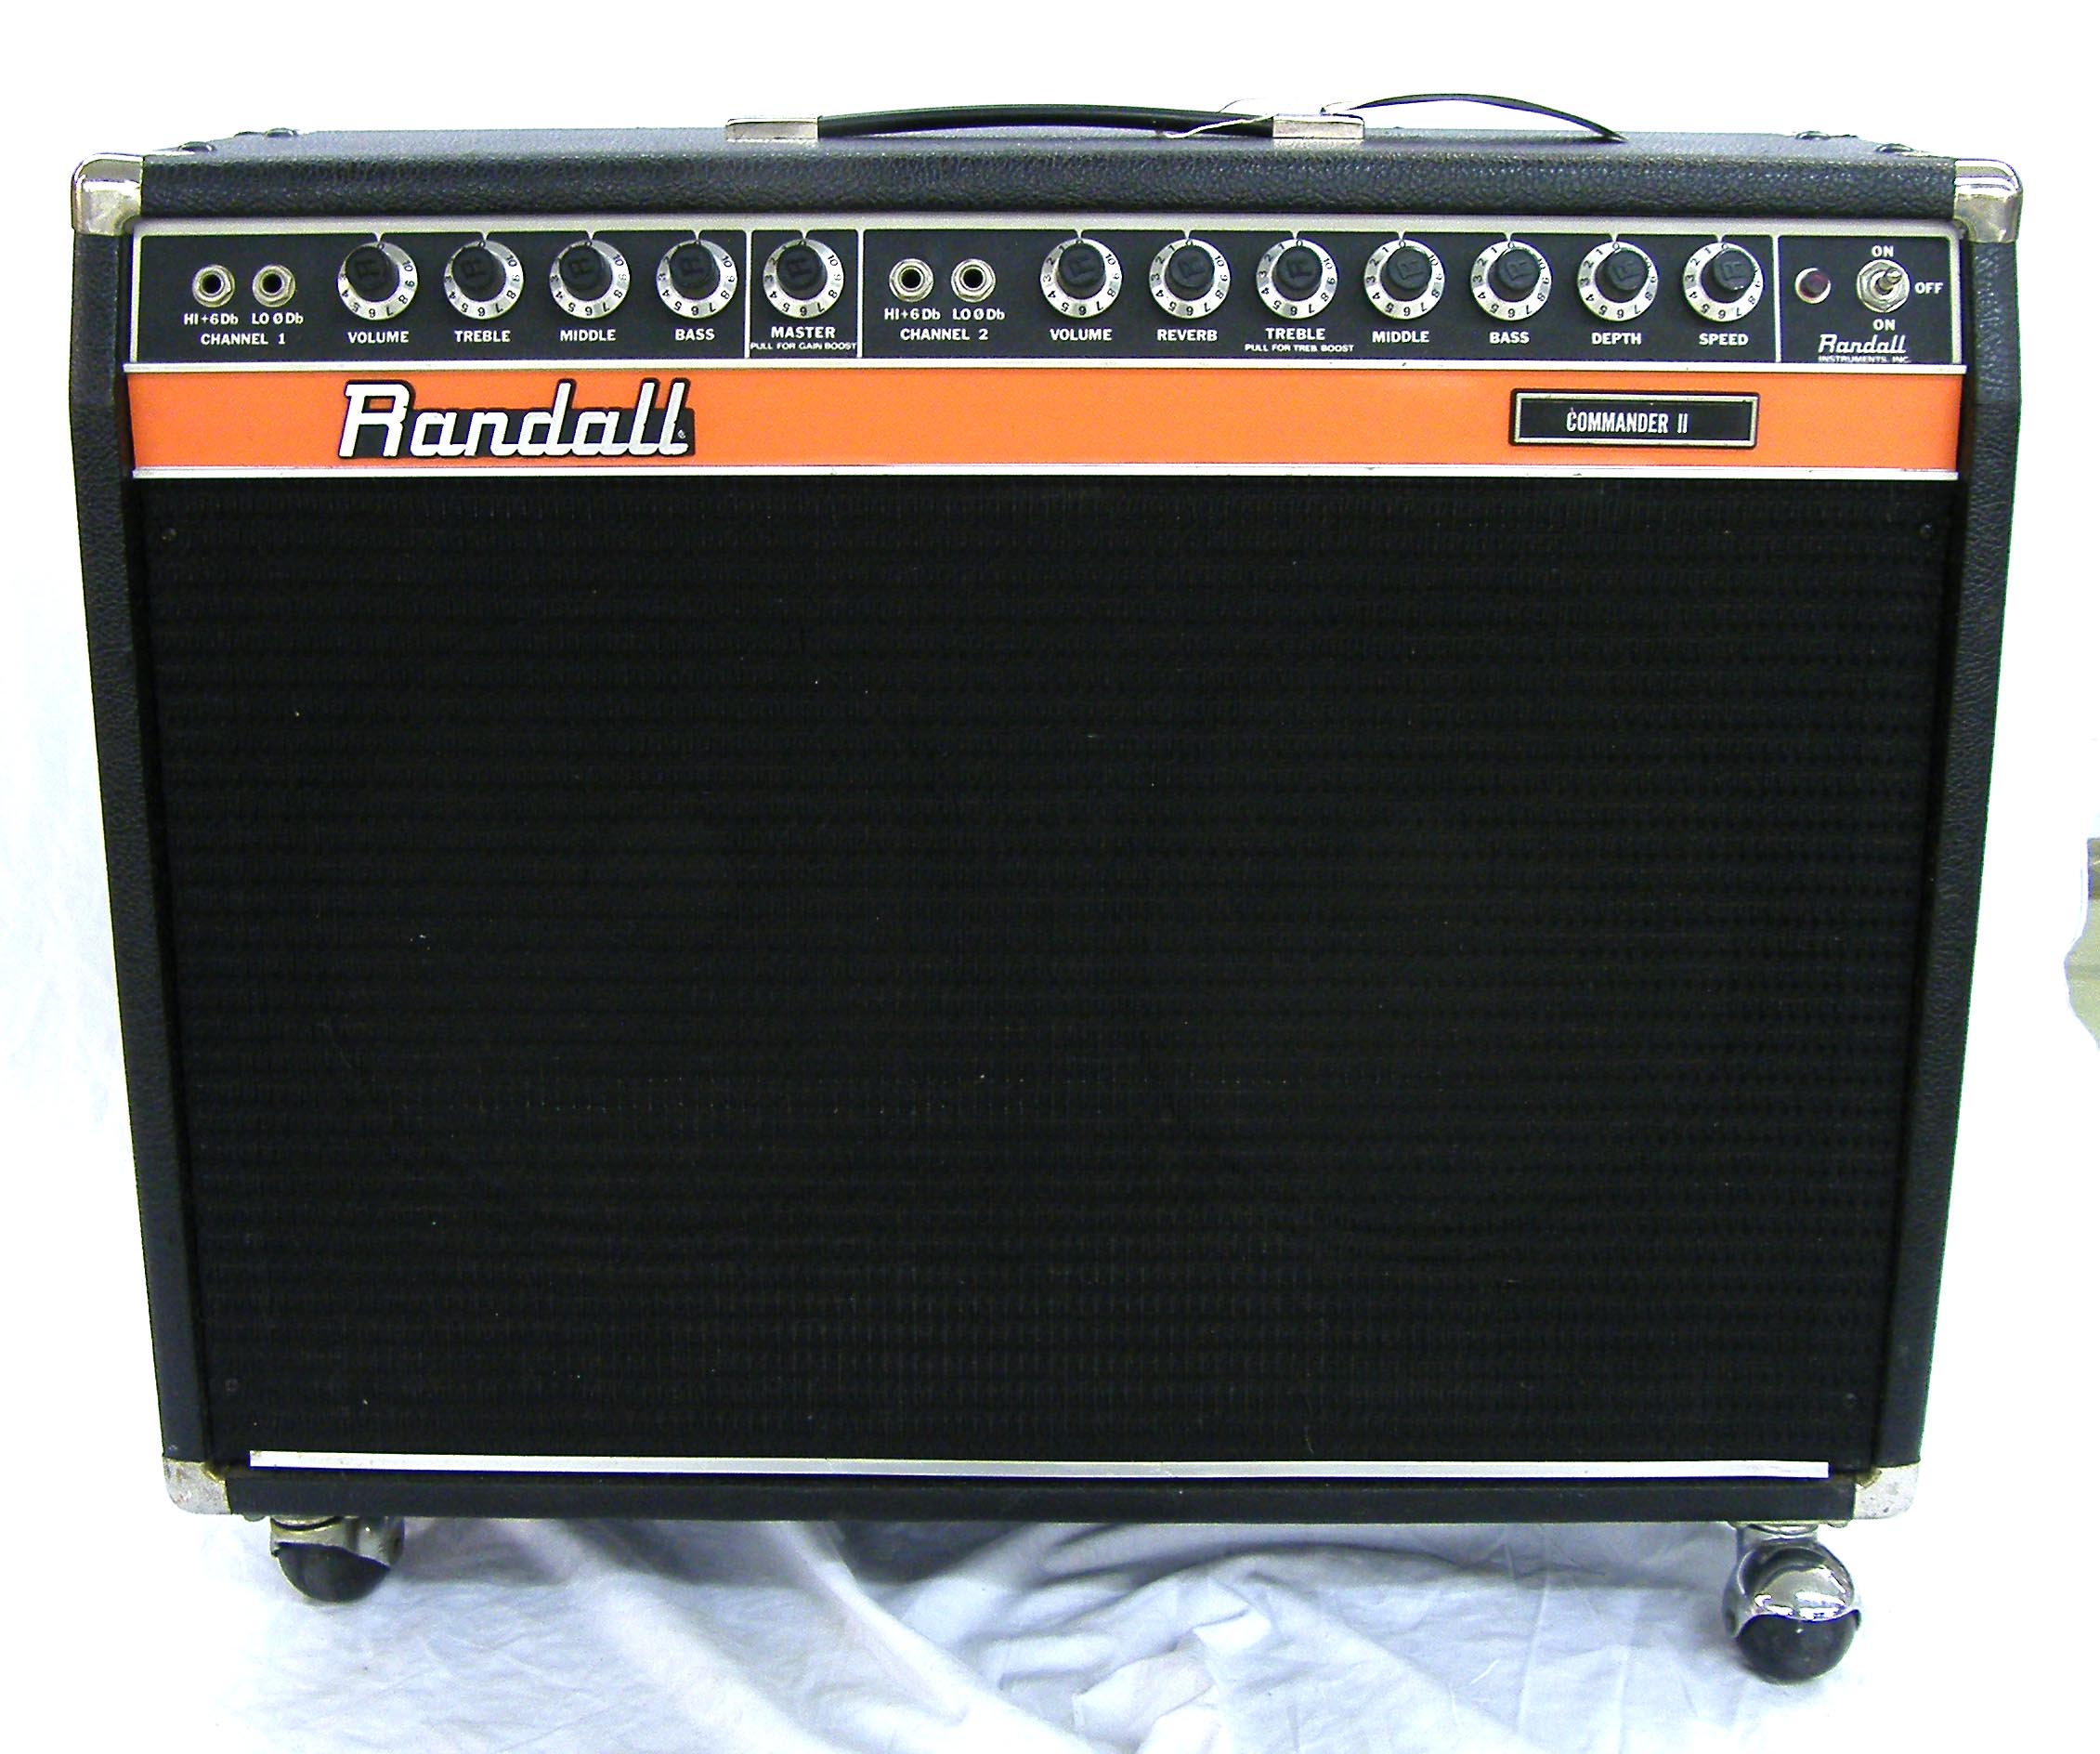 Randall Commander II RG-120-212 guitar amplifier, made in the USA, ser. no. 122254, aesthetically in